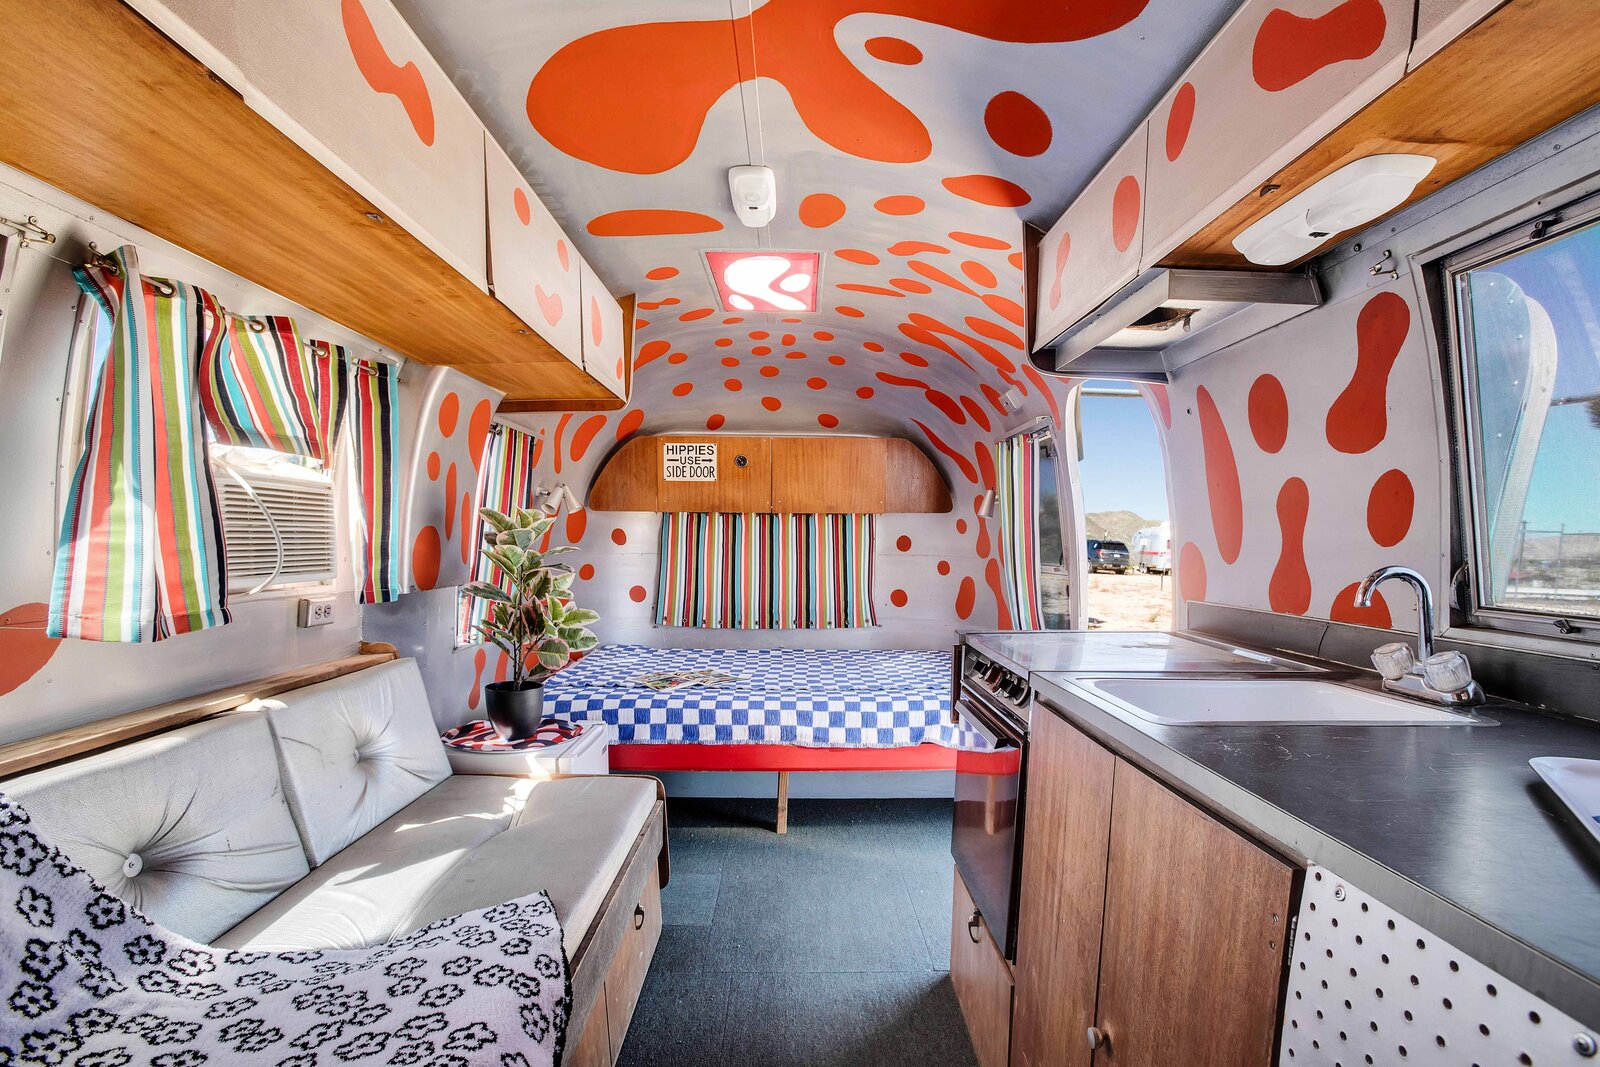 B-52s Singer Kate Pierson Is Selling Her Groovy Airstream Park for $450K